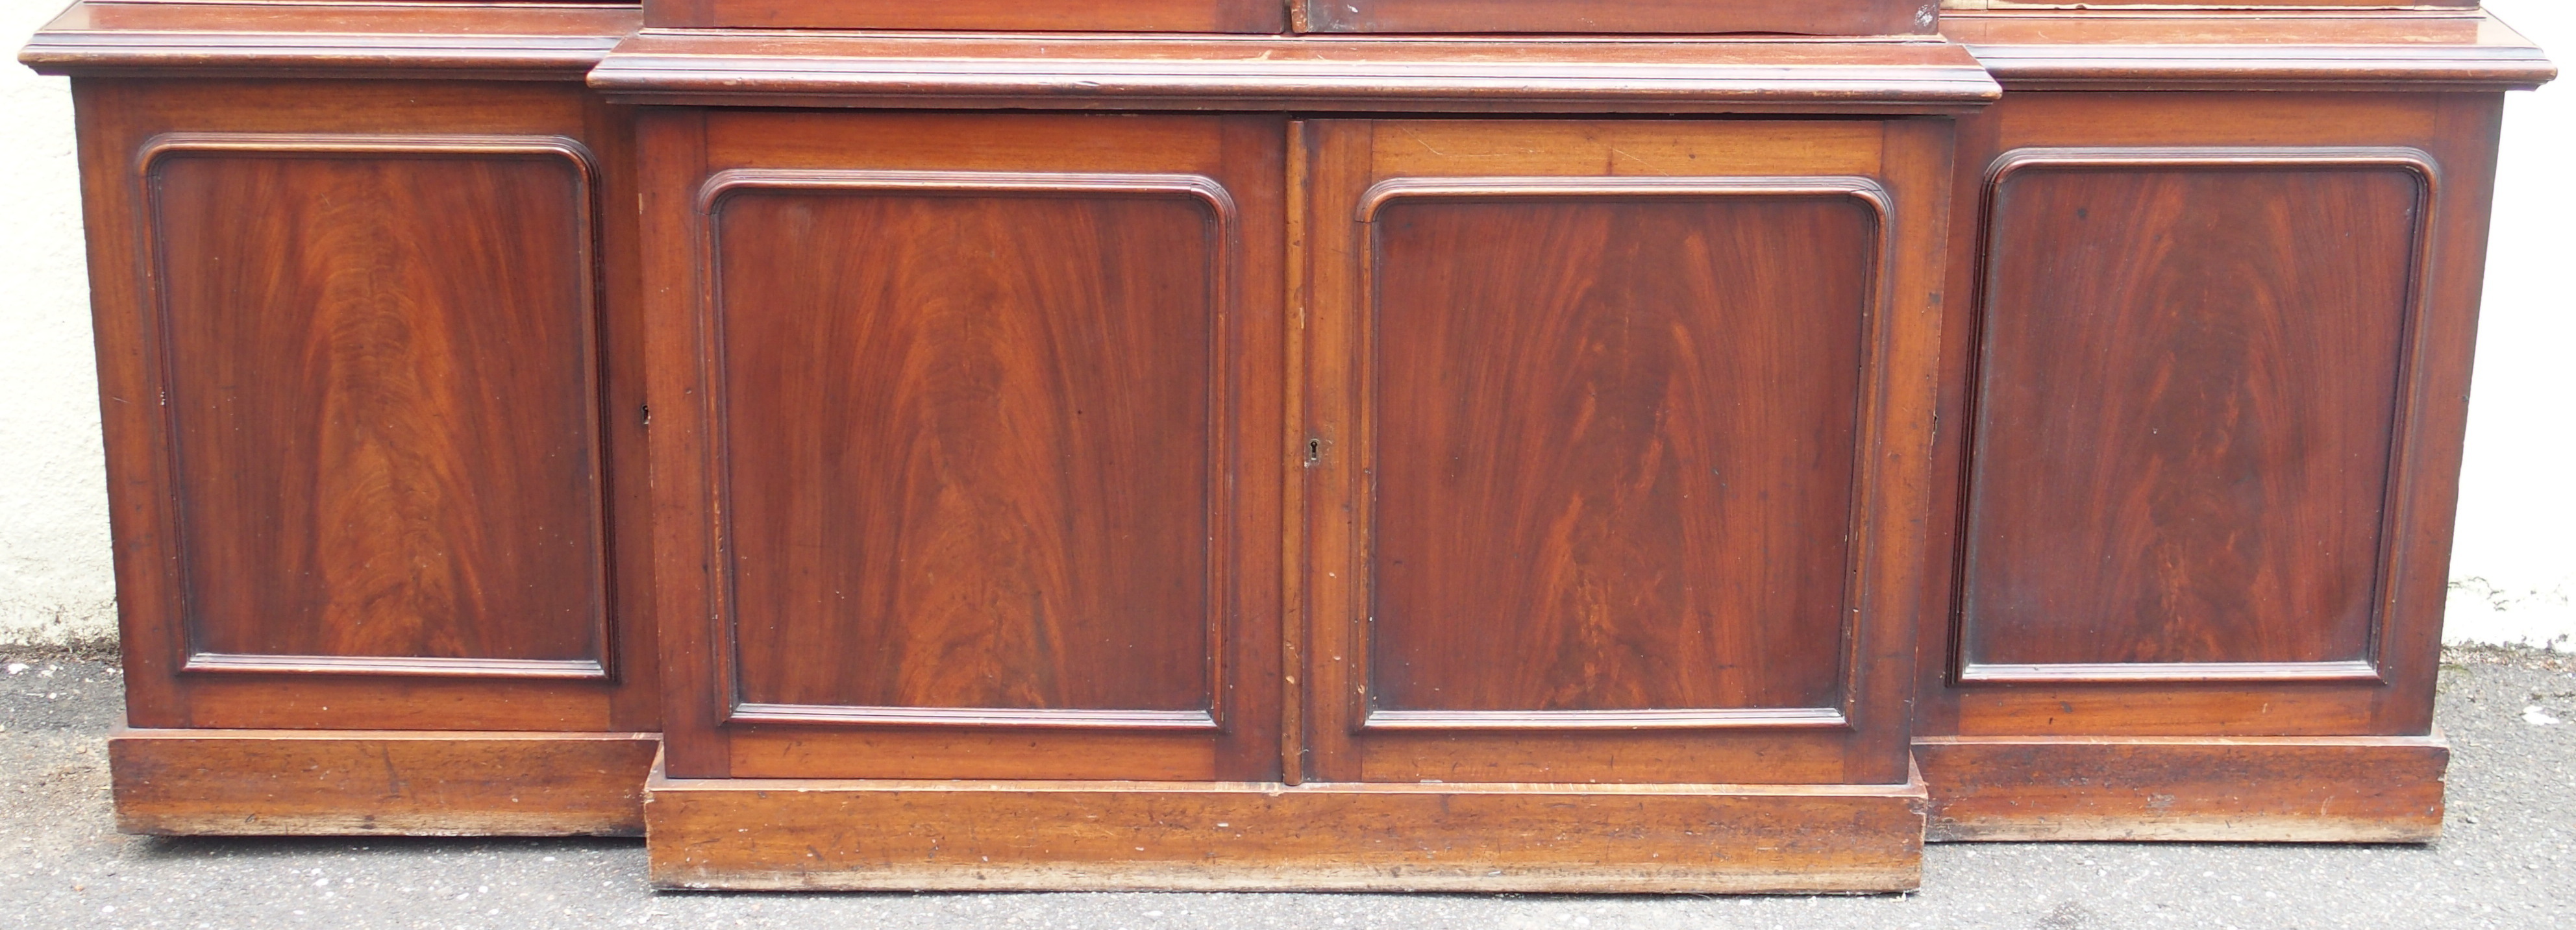 A VICTORIAN MAHOGANY BREAK FRONT BOOKCASE, with four glazed doors over a base with four doors, 231cm - Image 3 of 15